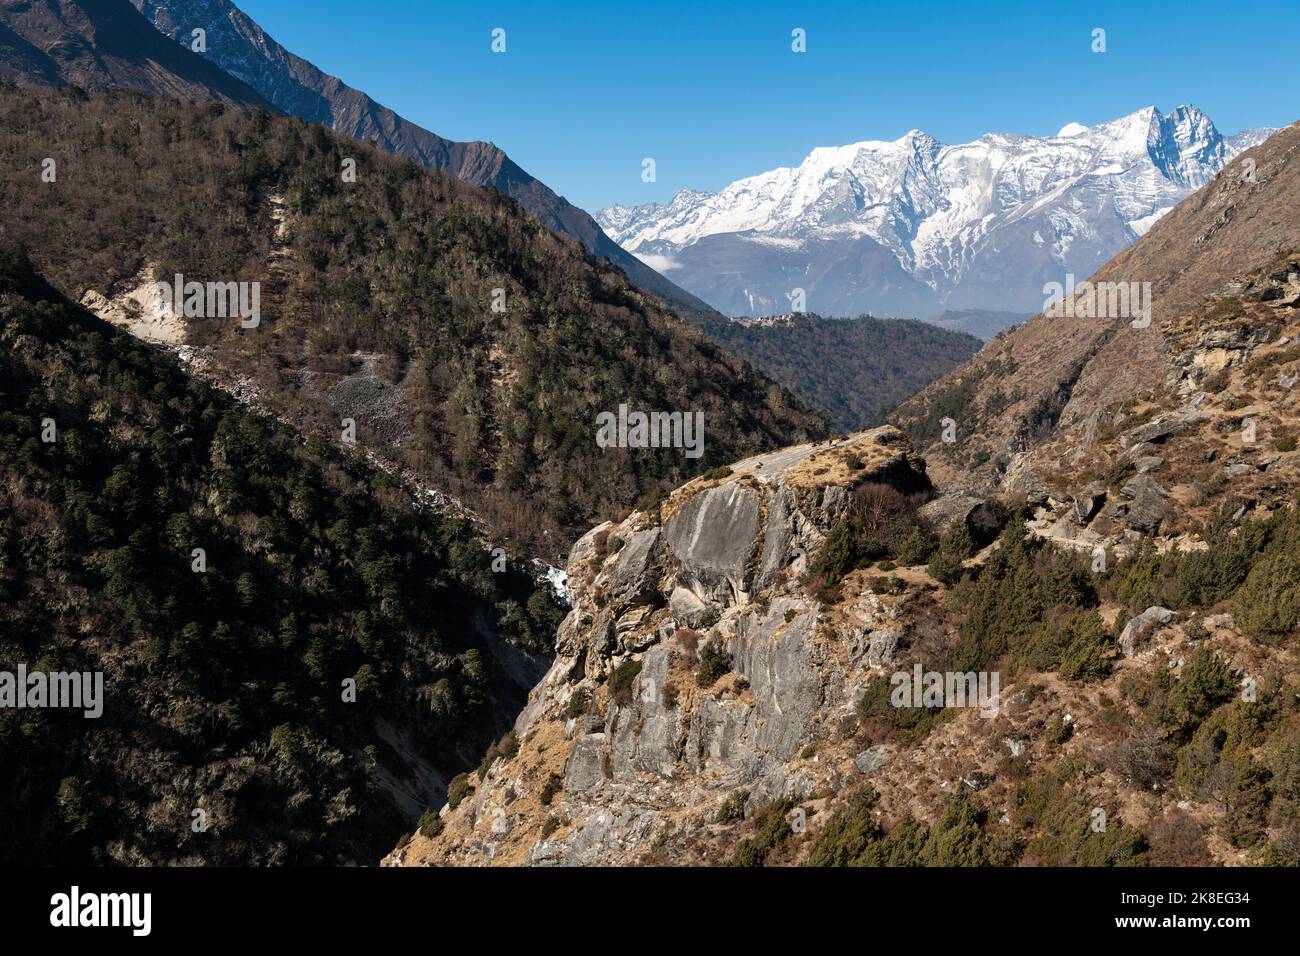 Photo of nature, beautiful high mountains with a trees, Nepal Stock Photo